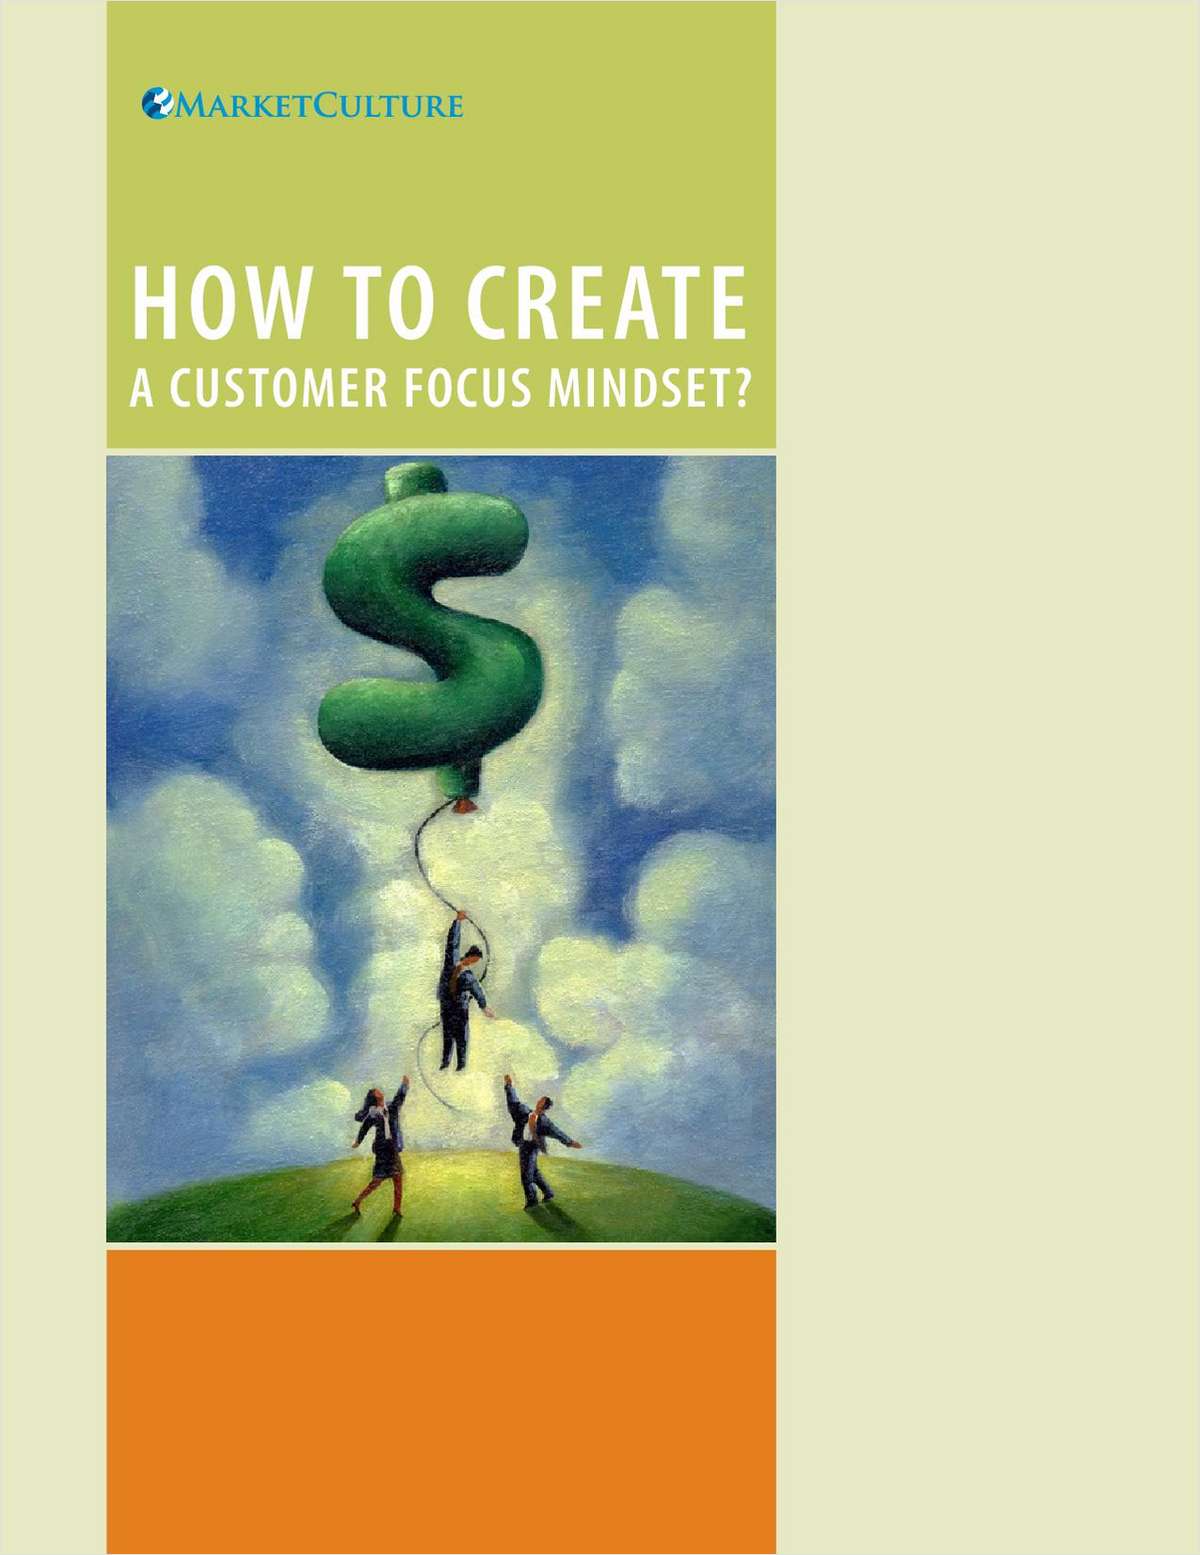 How to Create a Customer-Focus Mindset and Drive Business Growth